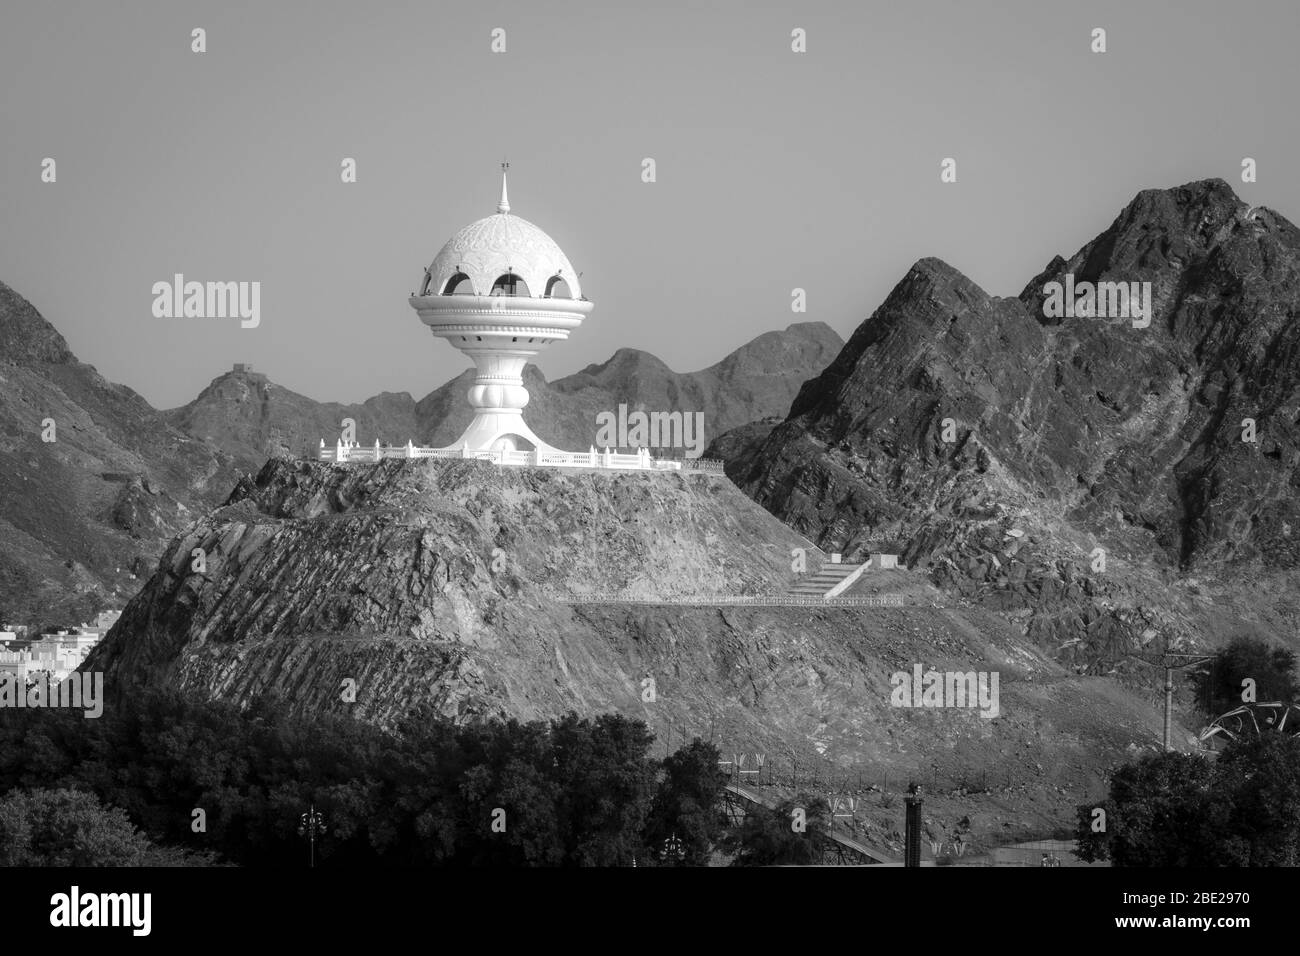 Muscat. Oman. Oman Sultanate, Muscat, Riyam Park, monument in the shape of a giant censer, Stock Photo